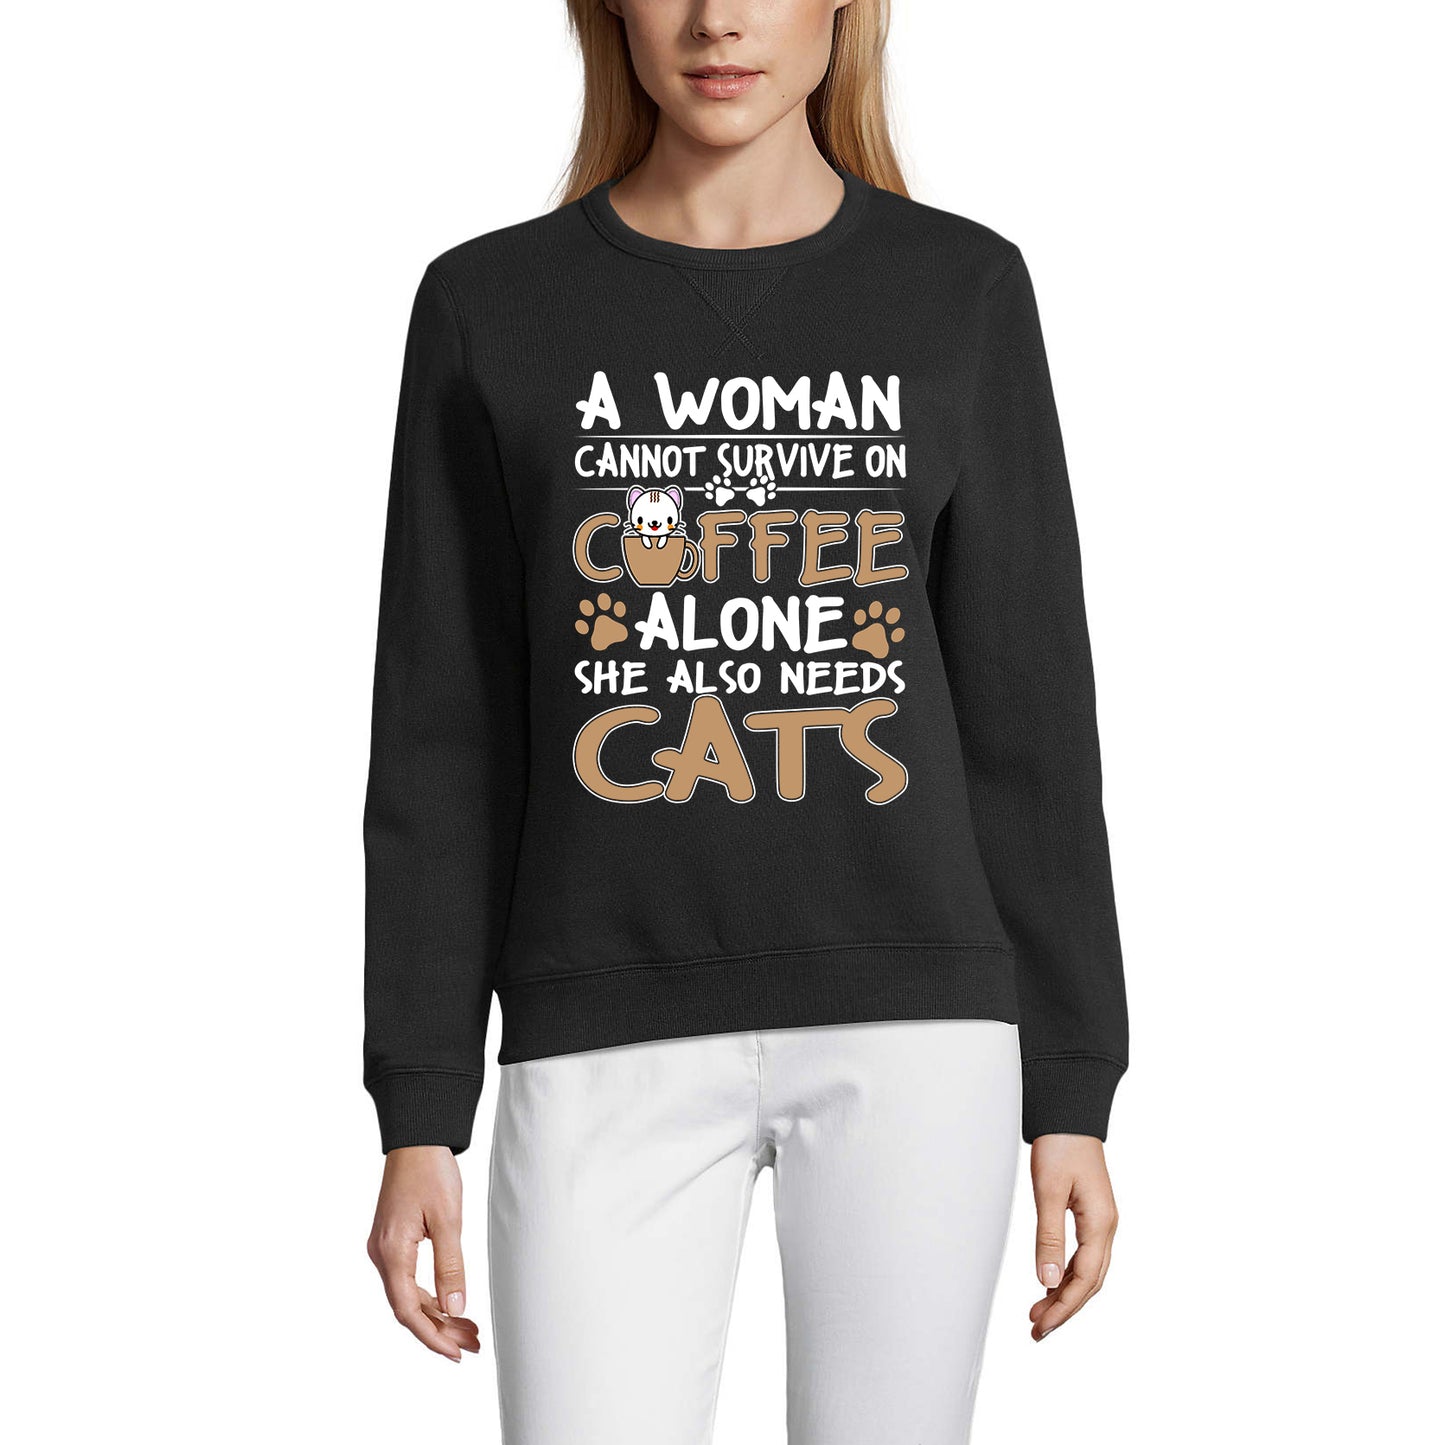 ULTRABASIC Women's Sweatshirt She Also Needs Cats - Cute Cat In Cup of Coffee